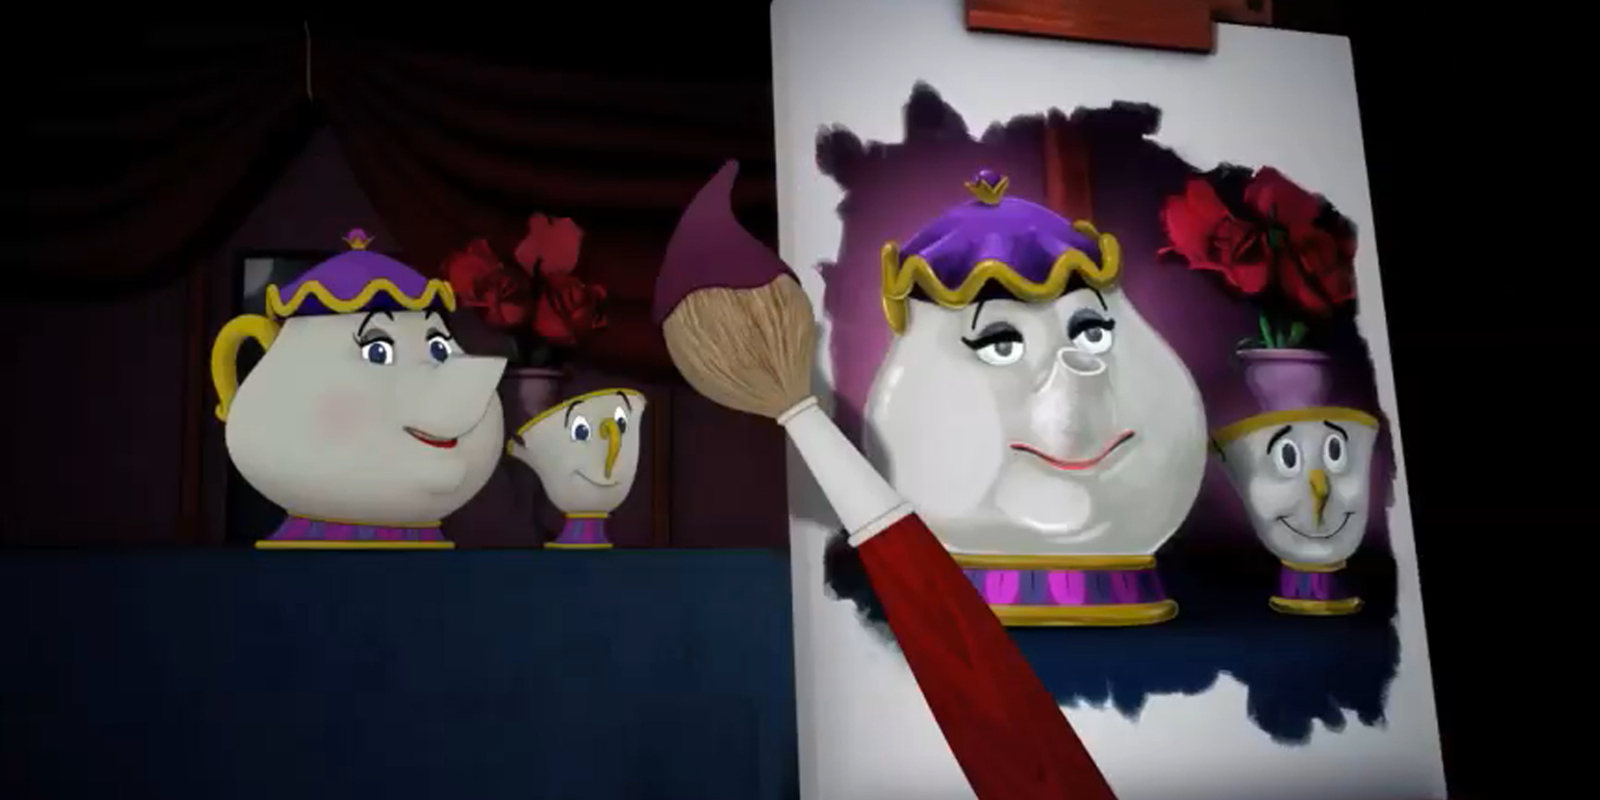 The characters of Mrs. Potts and Chip from Disney's animated film, 'Beauty and the Beast.'